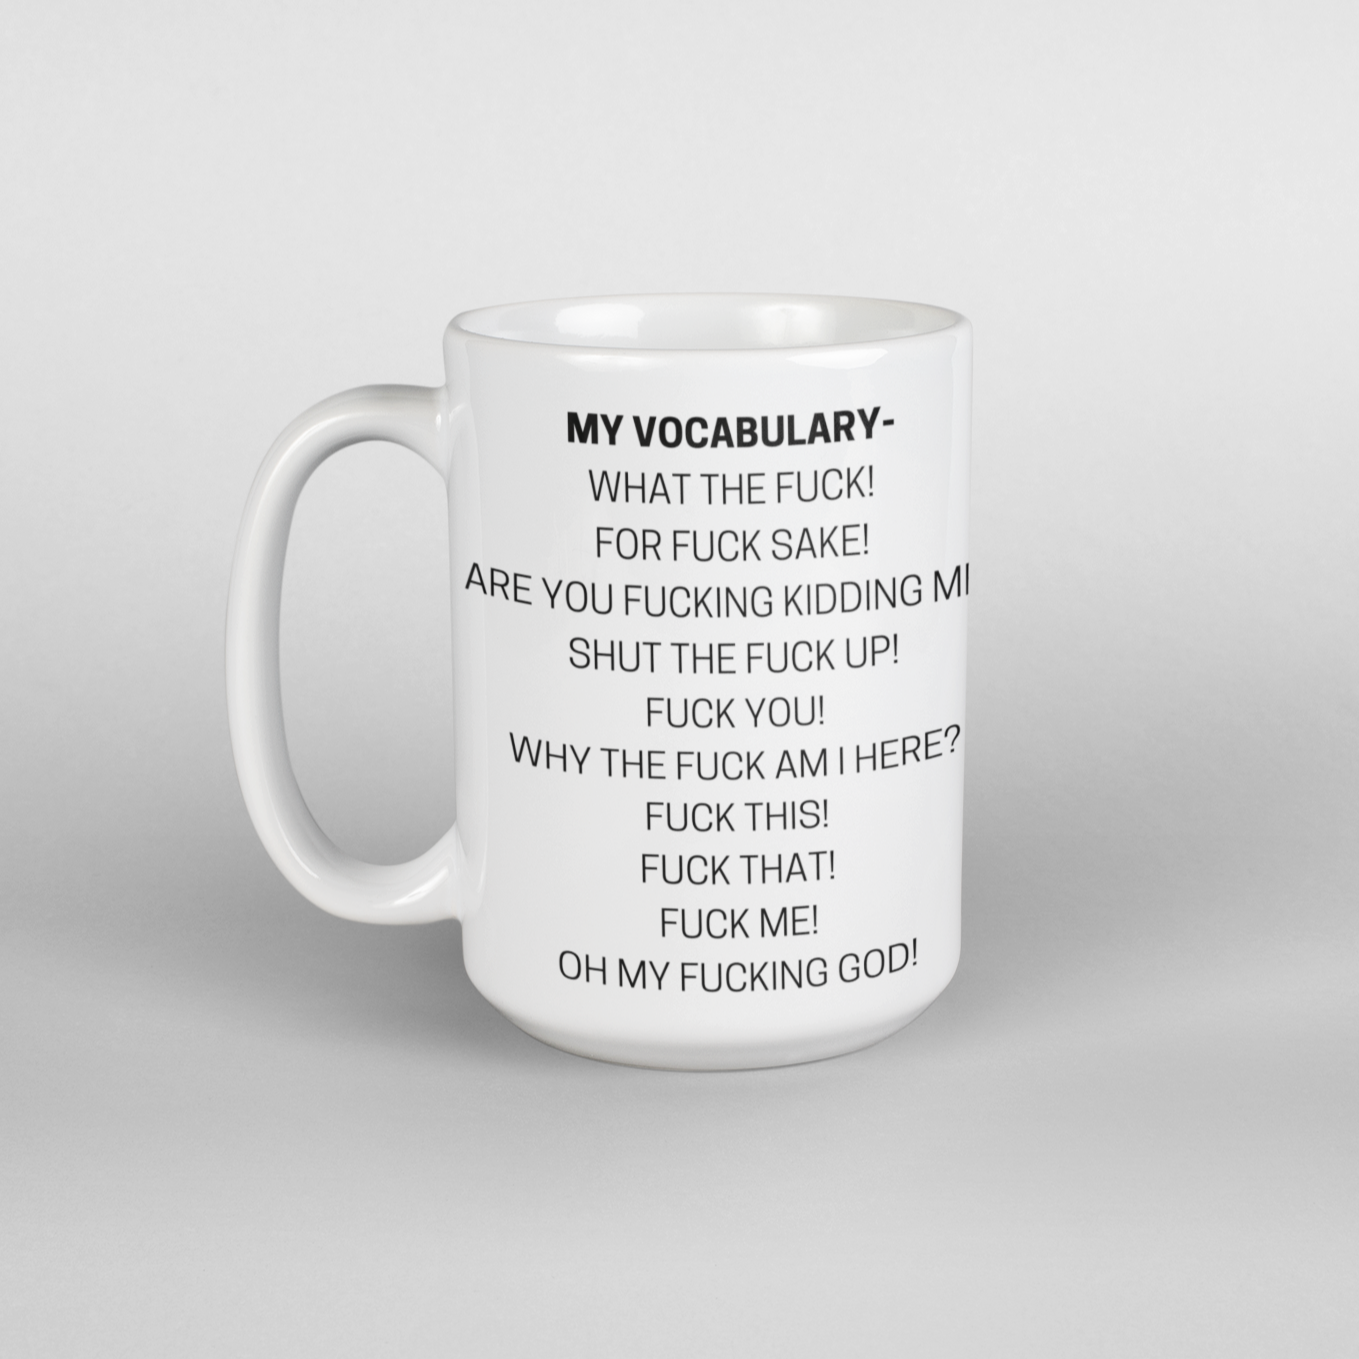 This My Swear Vocabulary Rude Sweary Funny Coffee Mug makes the perfect gift for any coffee lover. It is made of durable ceramic, ensuring a long-lasting life. The bold design and statement of "My Swear Vocabulary" is sure to be a conversation starter at any gathering. Enjoy your favourite beverage in this unique and humorous large 15oz mug!